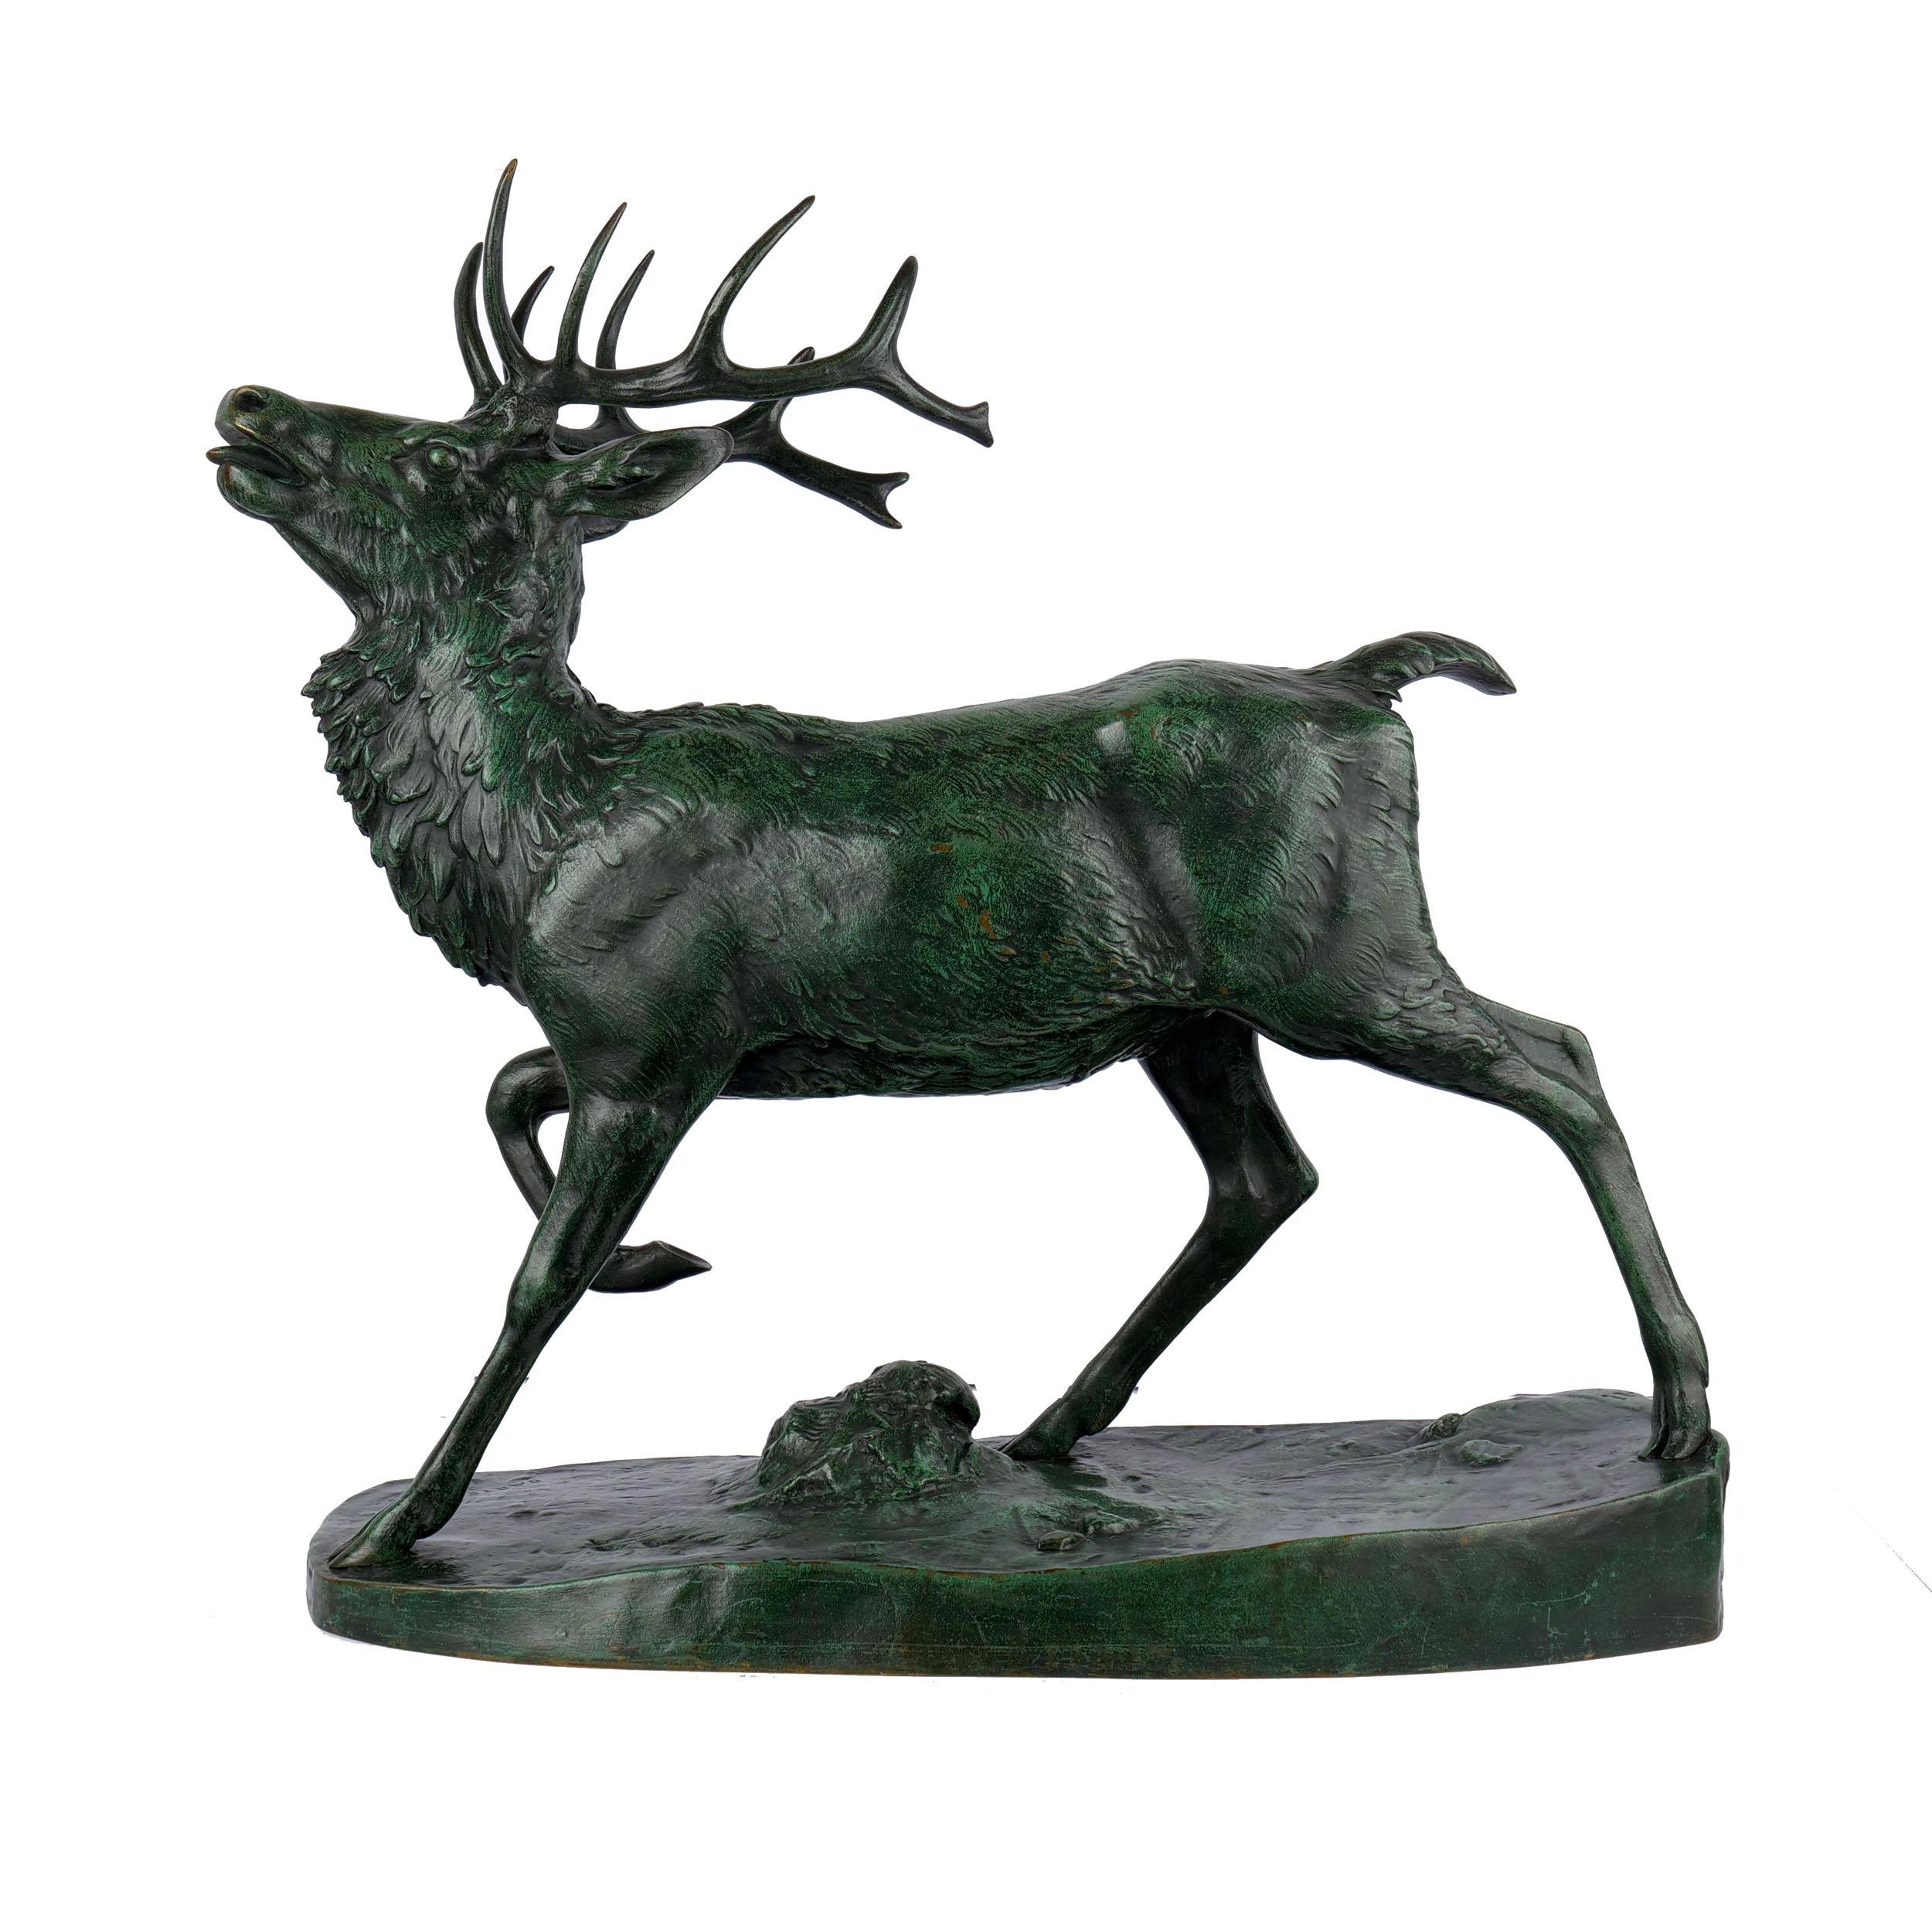 French “Cerf Debout” Stag Standing Sculpture, Antoine-Louis Barye, circa 1850-1870